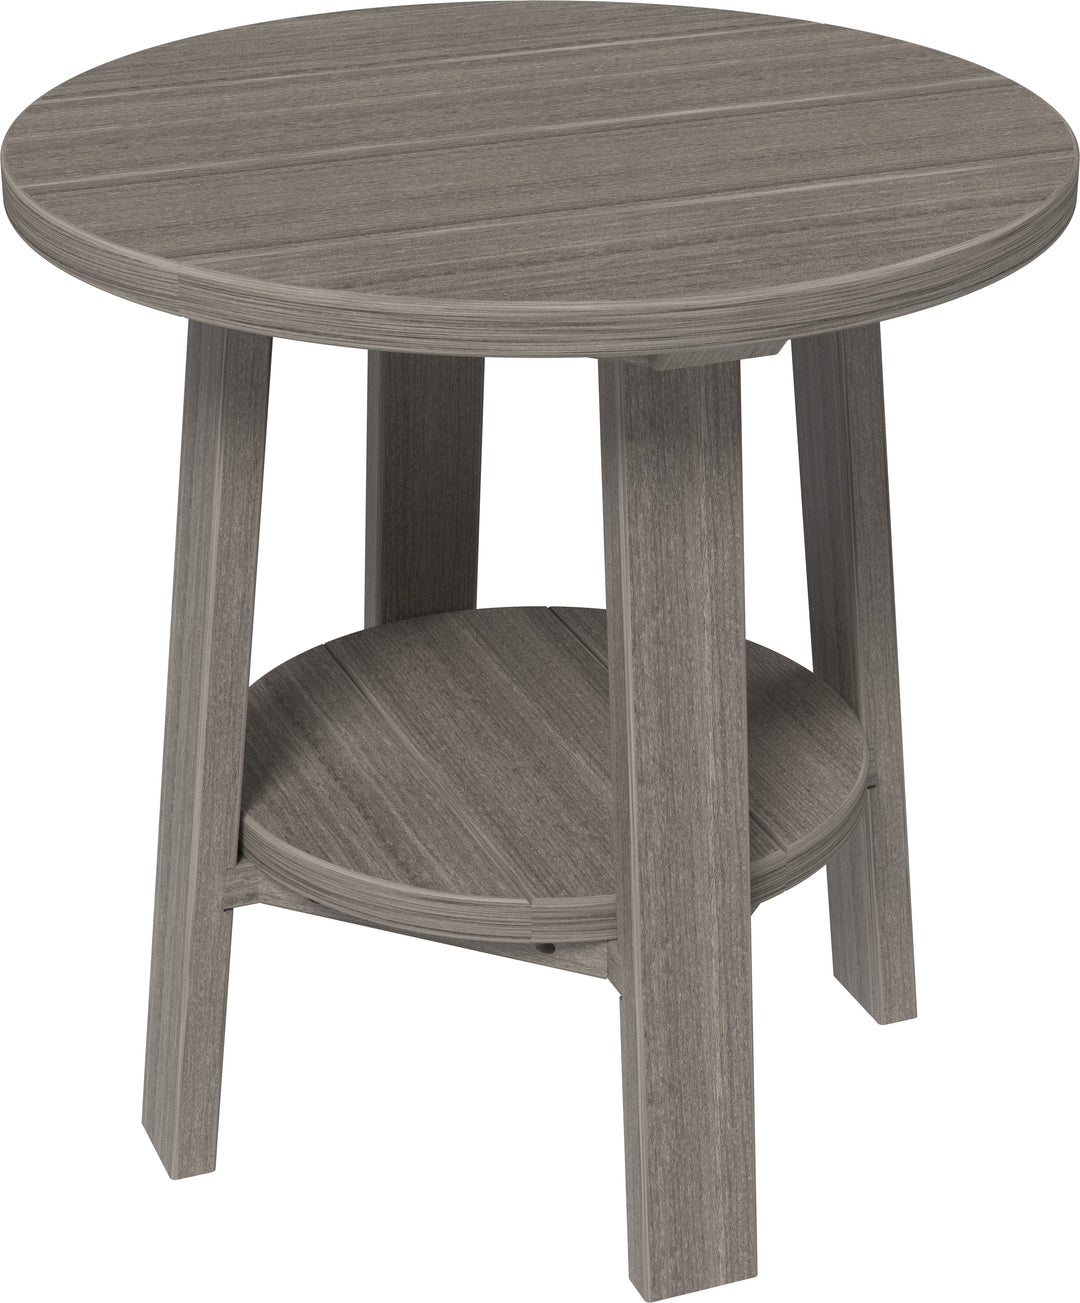 Luxcraft Deluxe End Tables